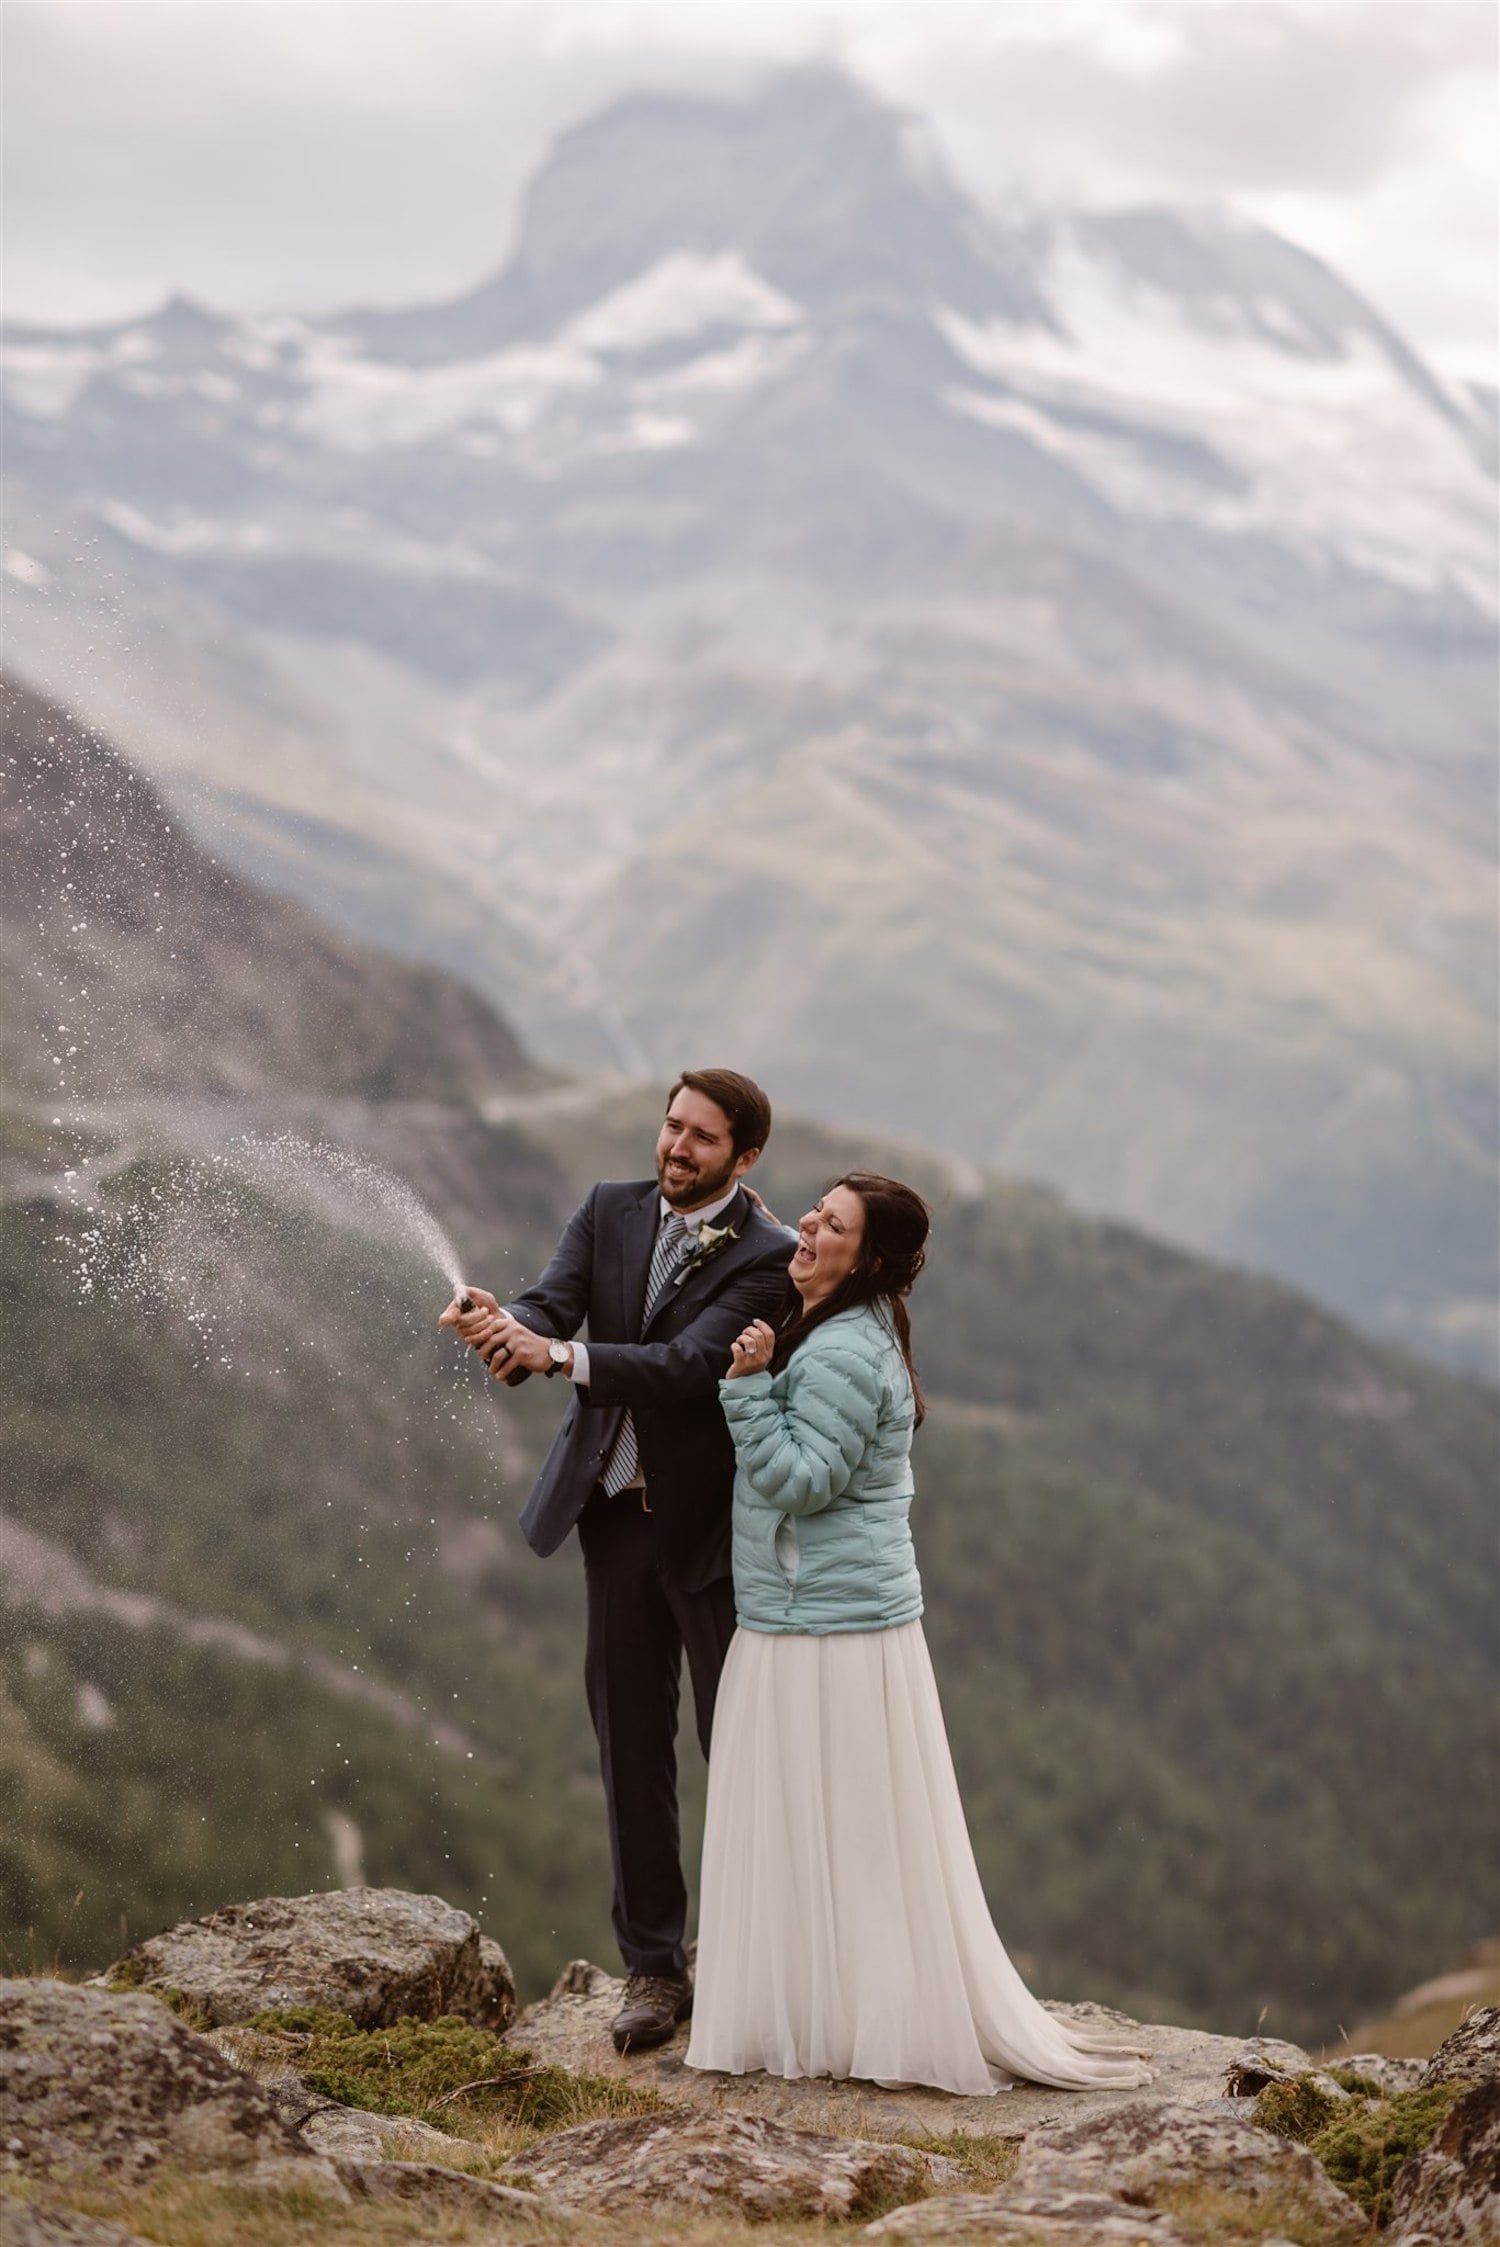 Newlyweds popping the Champagne during their summer elopement in Zermatt